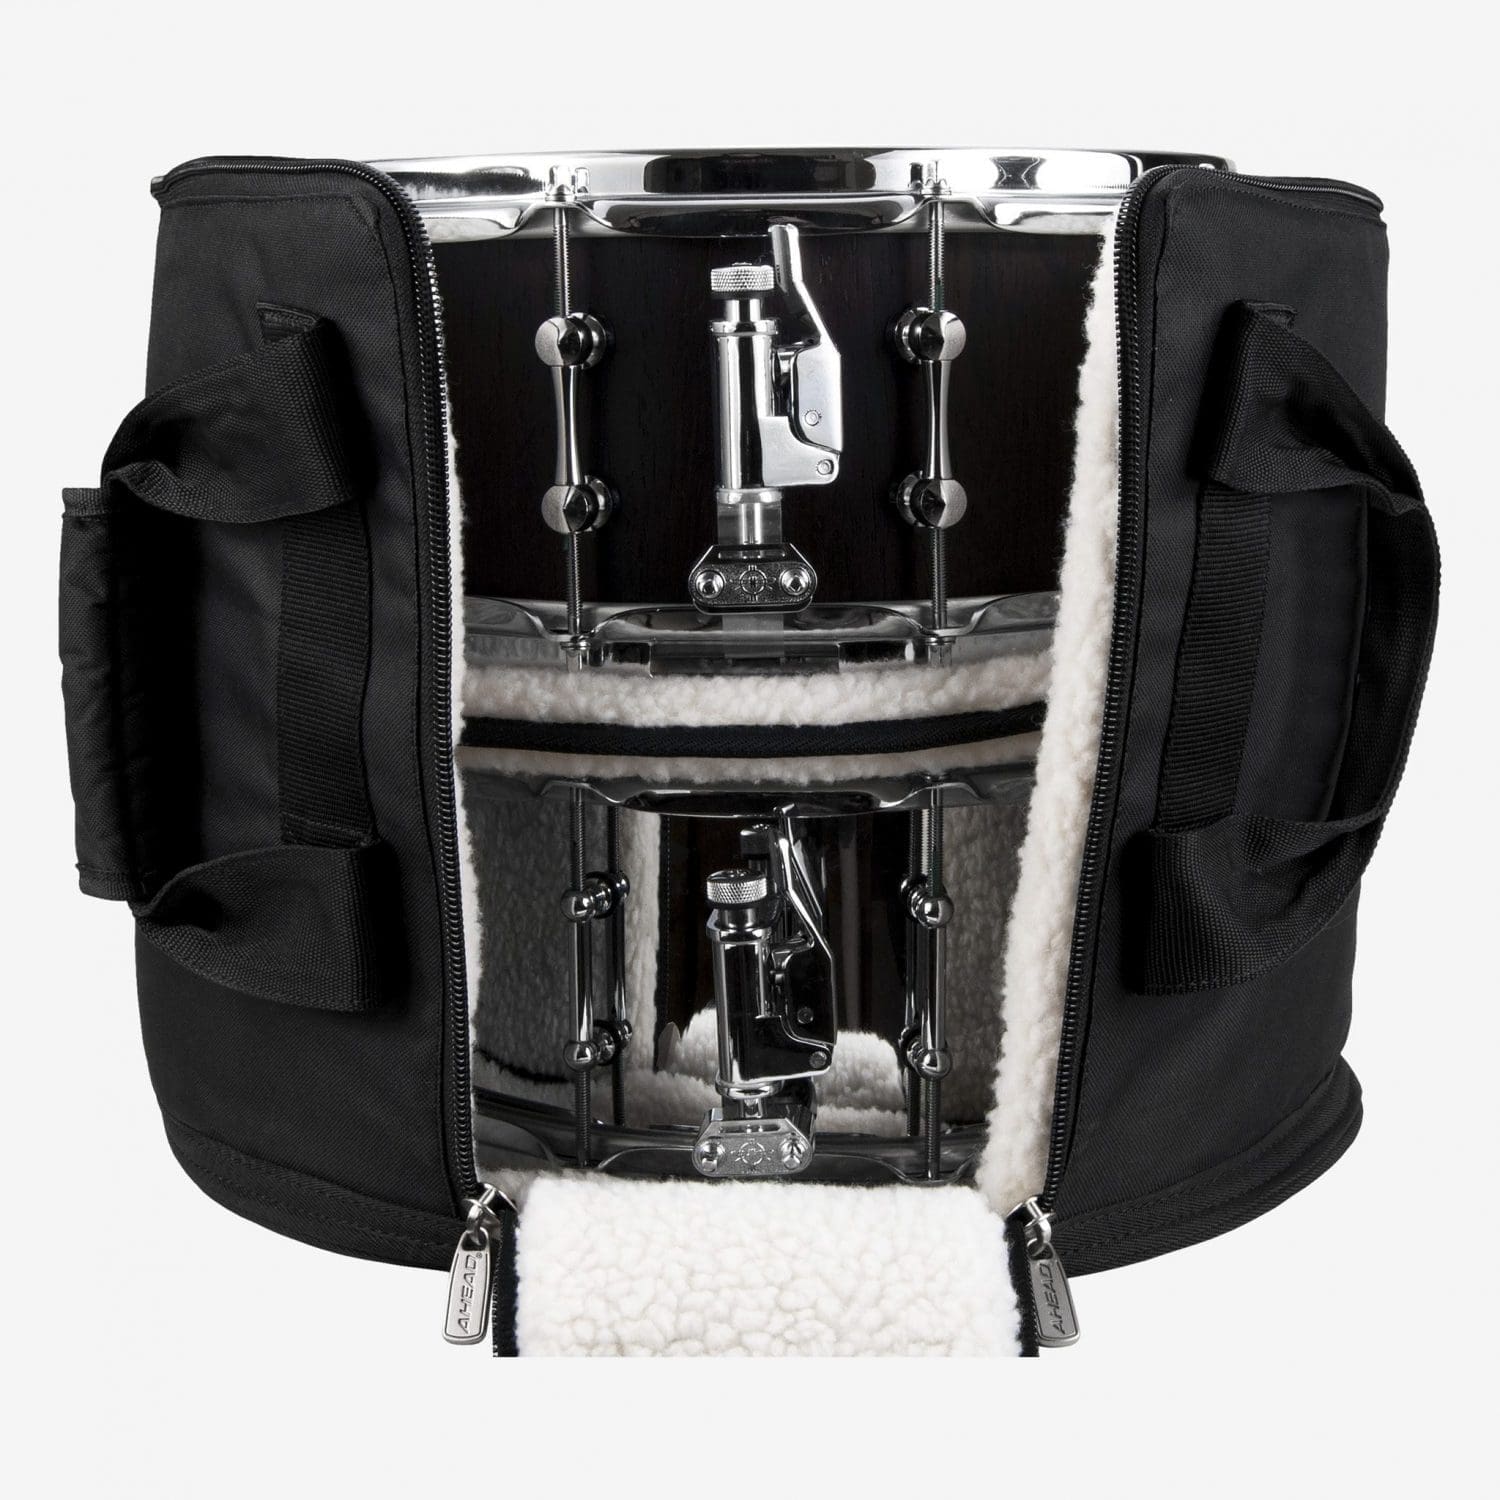 Timbale Case